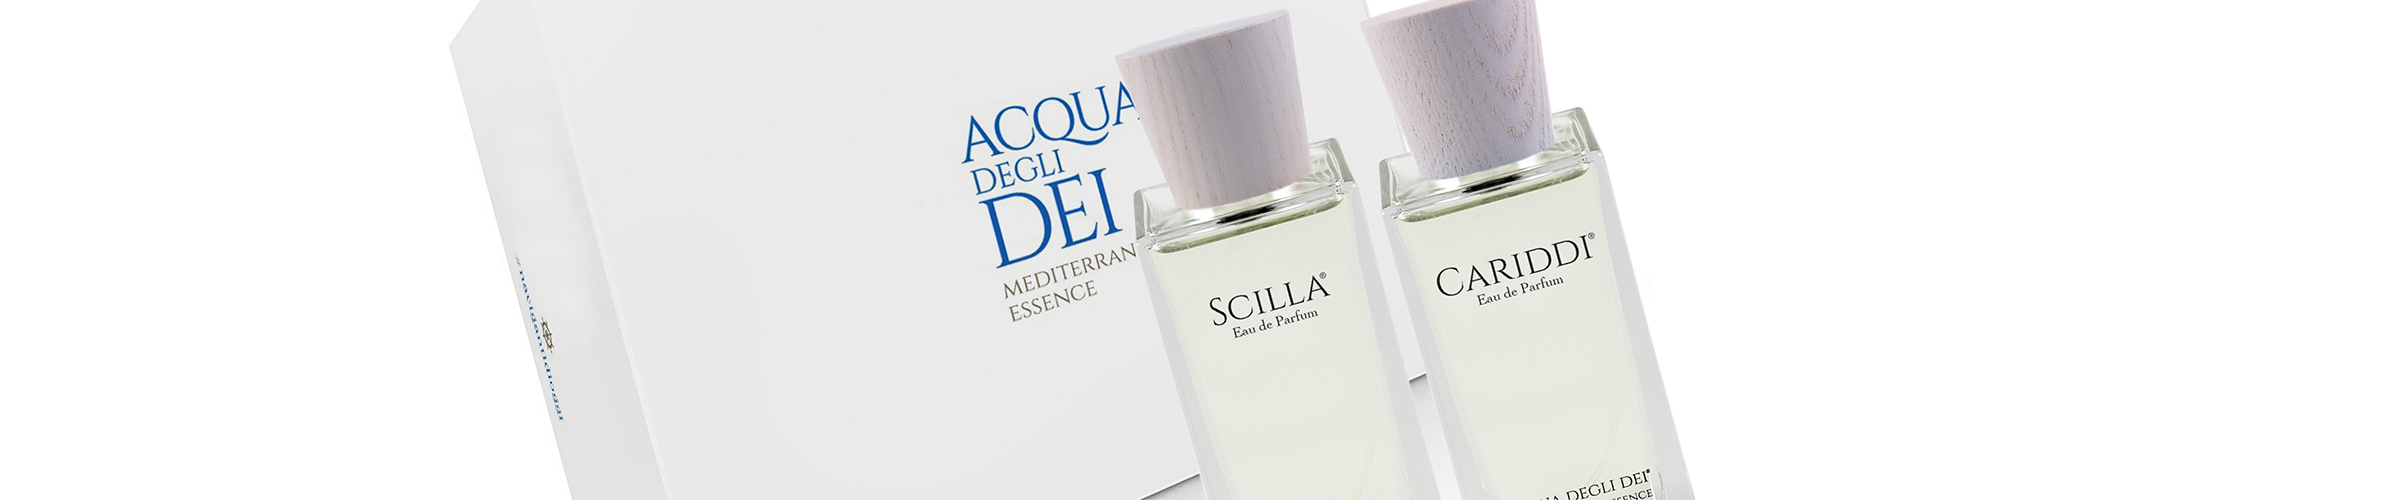 The two eau de parfum Scilla and Cariddi in the 100 ml format, kept in the elegant gift box